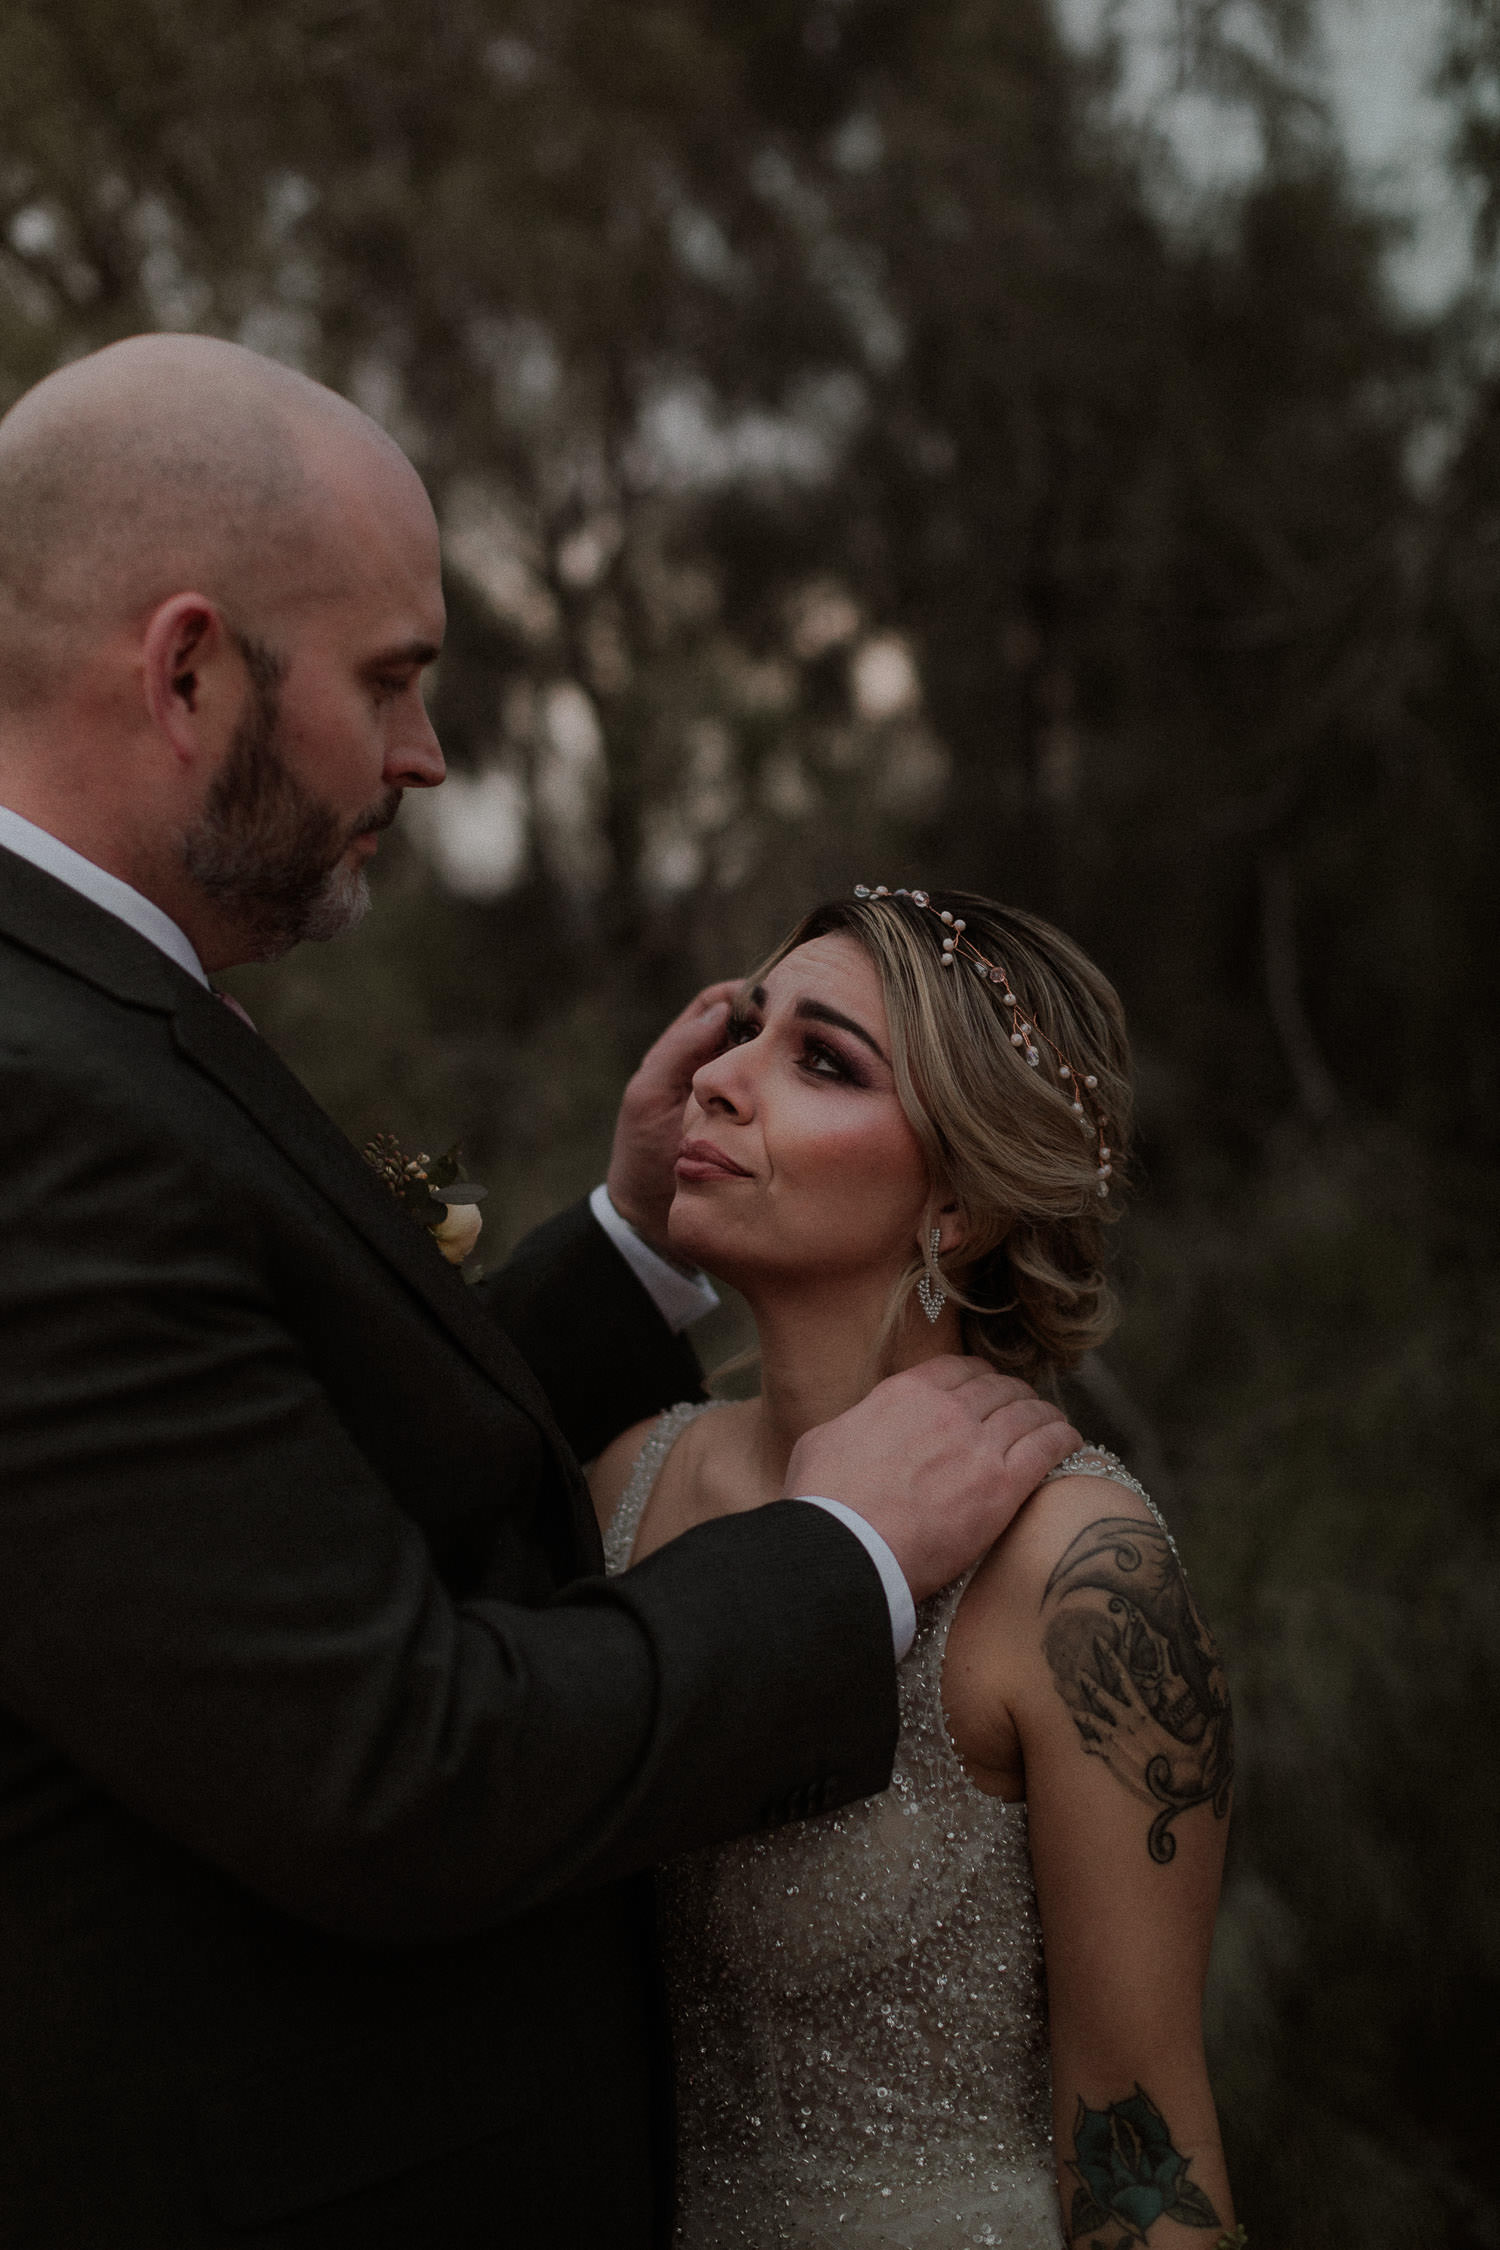 Brides tries to hold back tears as her new husband looks into her eyes and touches her cheek. This intimate forest elopement was so emotional and perfect for the couple